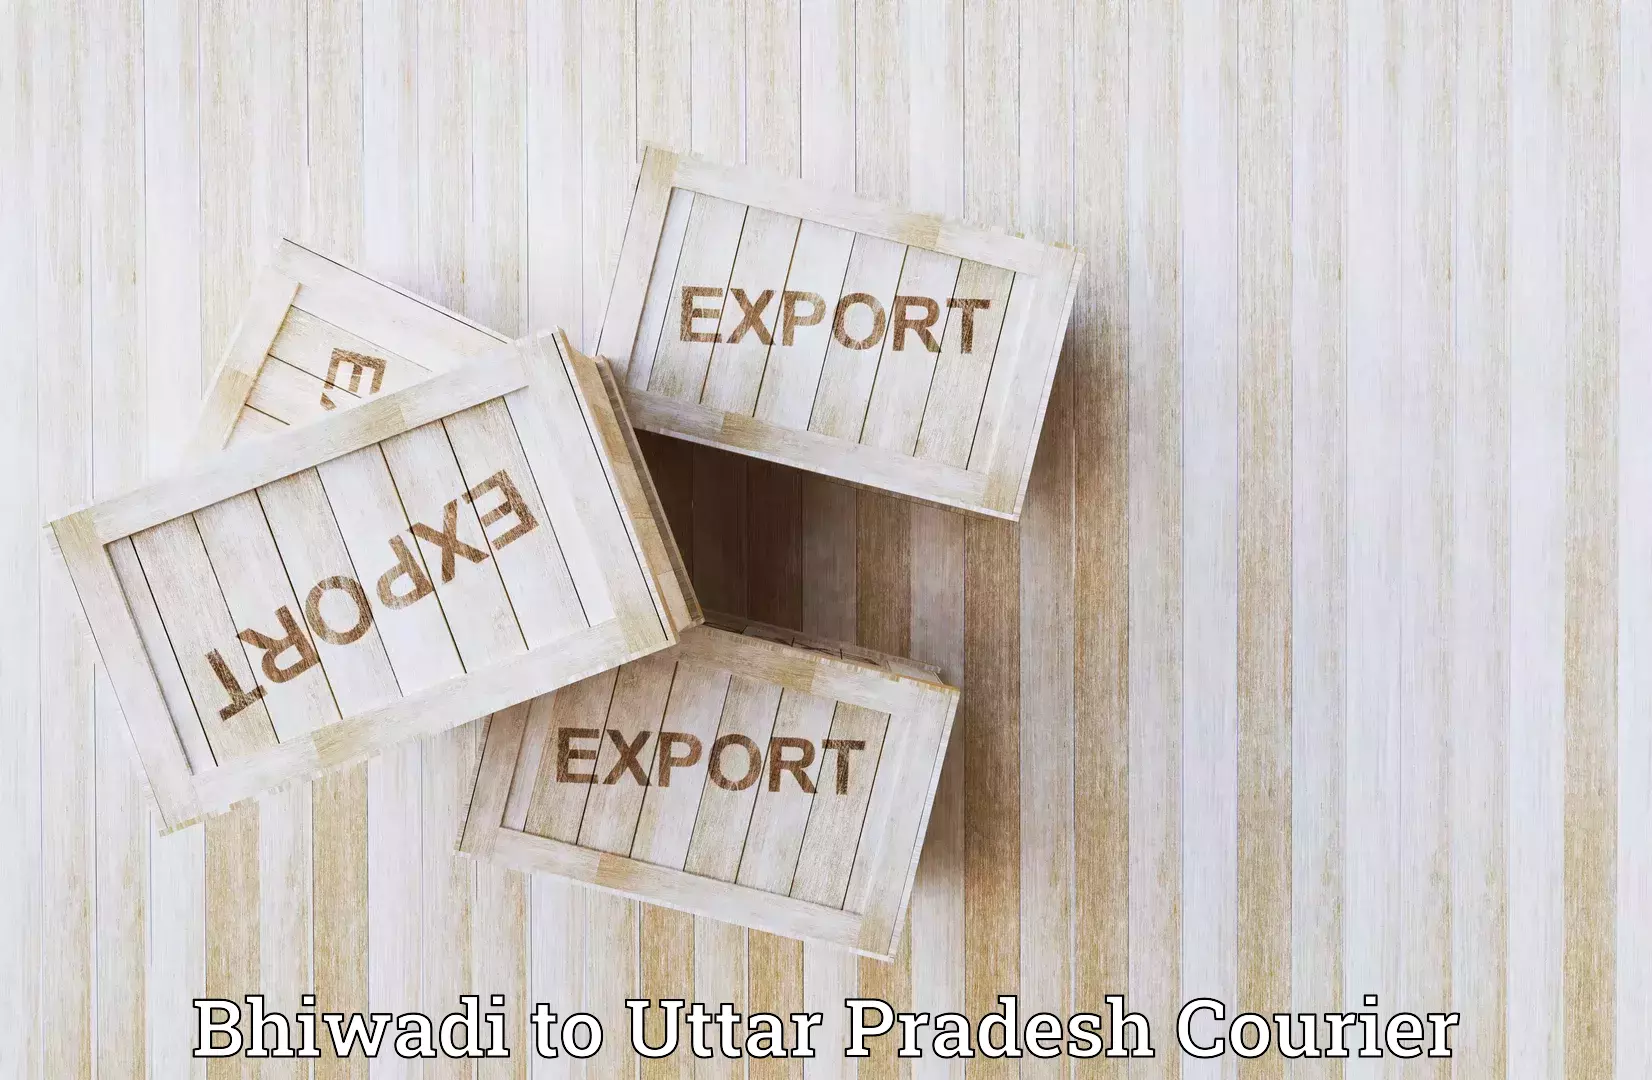 Parcel handling and care Bhiwadi to Sultanpur